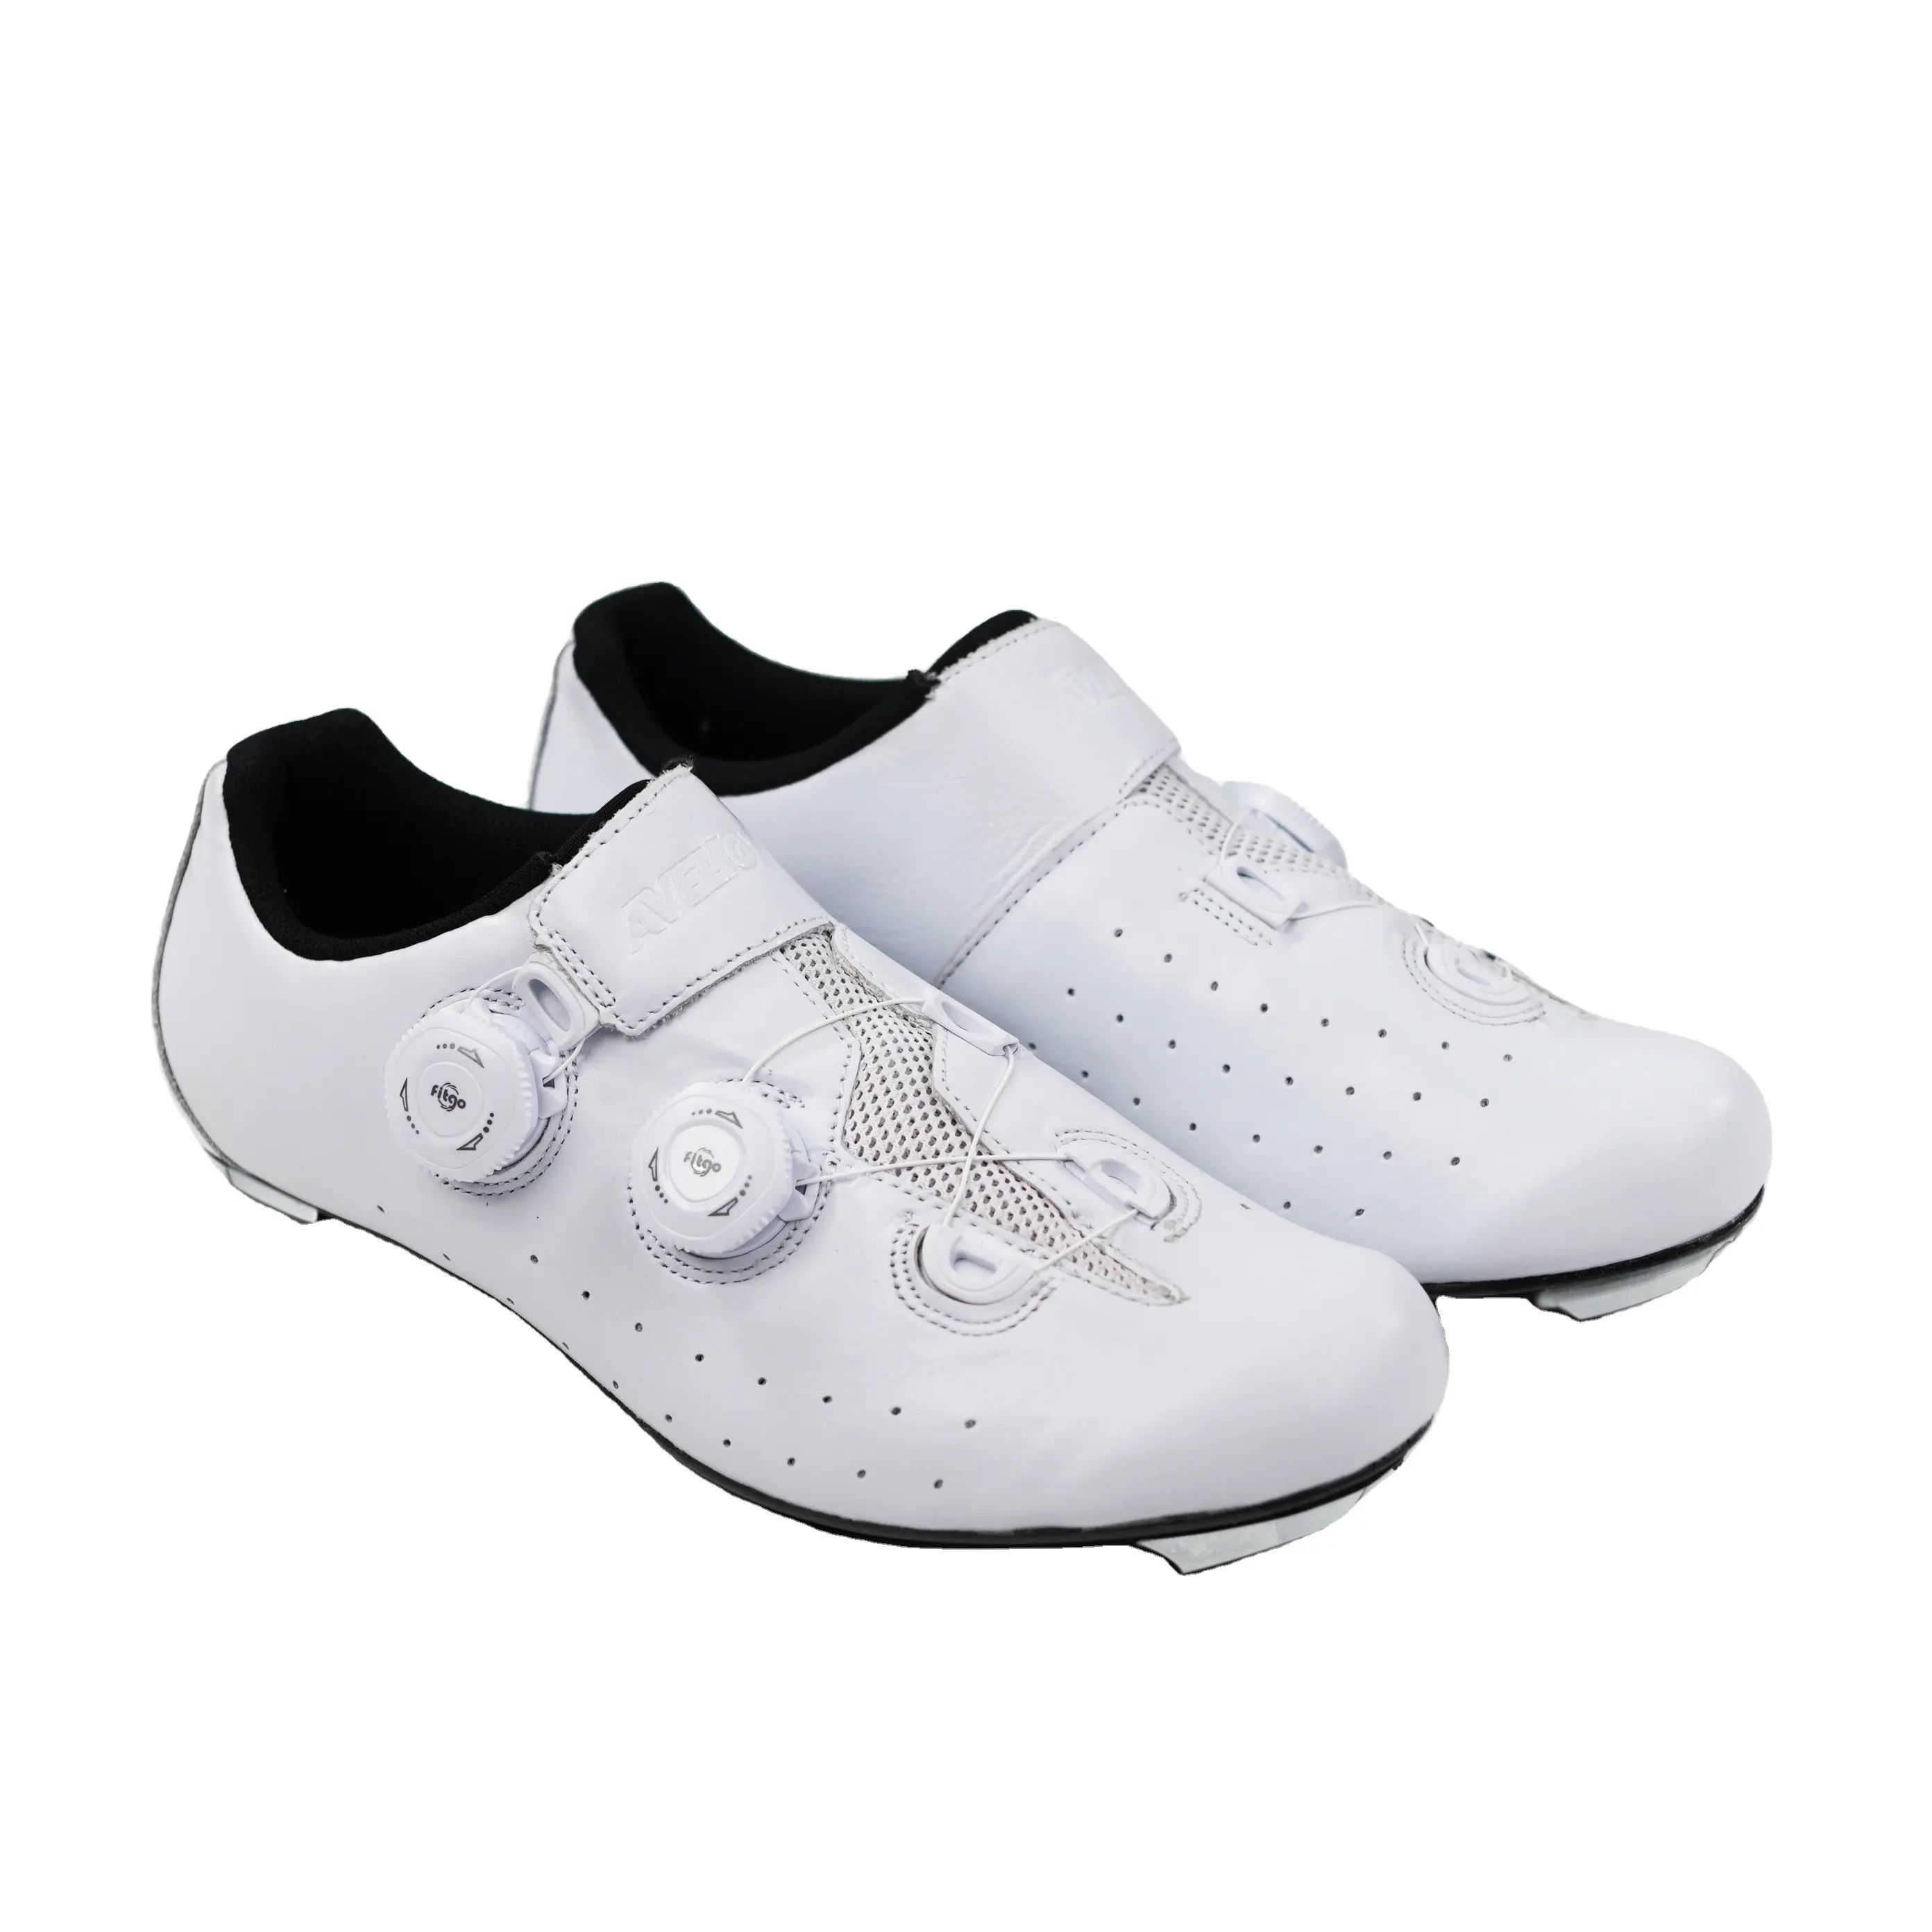 Best Price Factory Wholesale Standard Road Bike Shoes Mountain Bike Cycling Sneakers from Indonesia